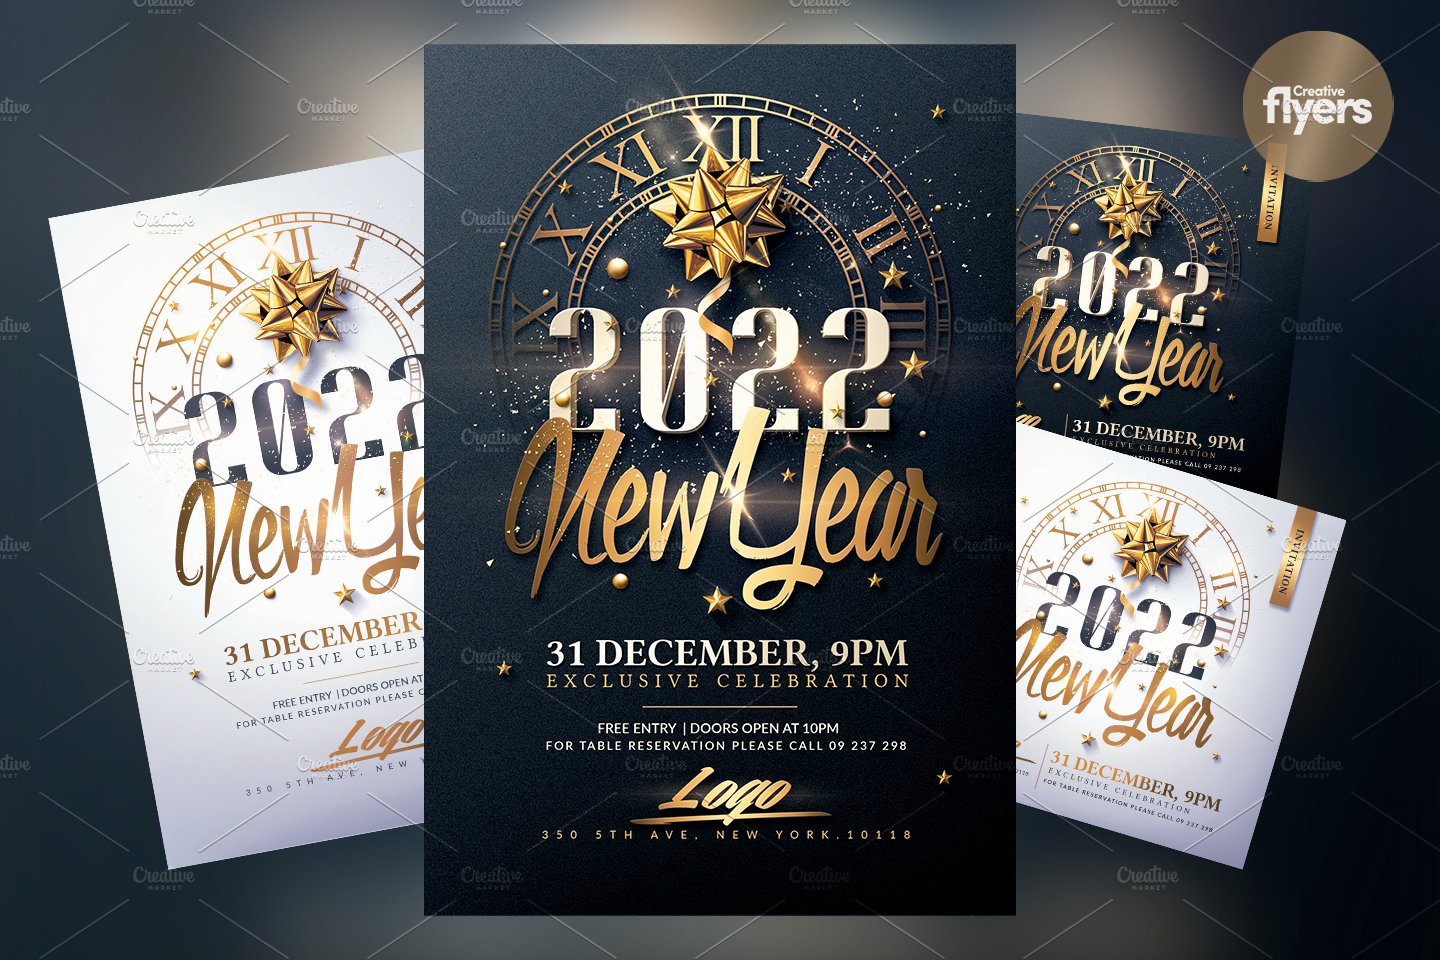 New Year Invitation - Psd Package cover image.